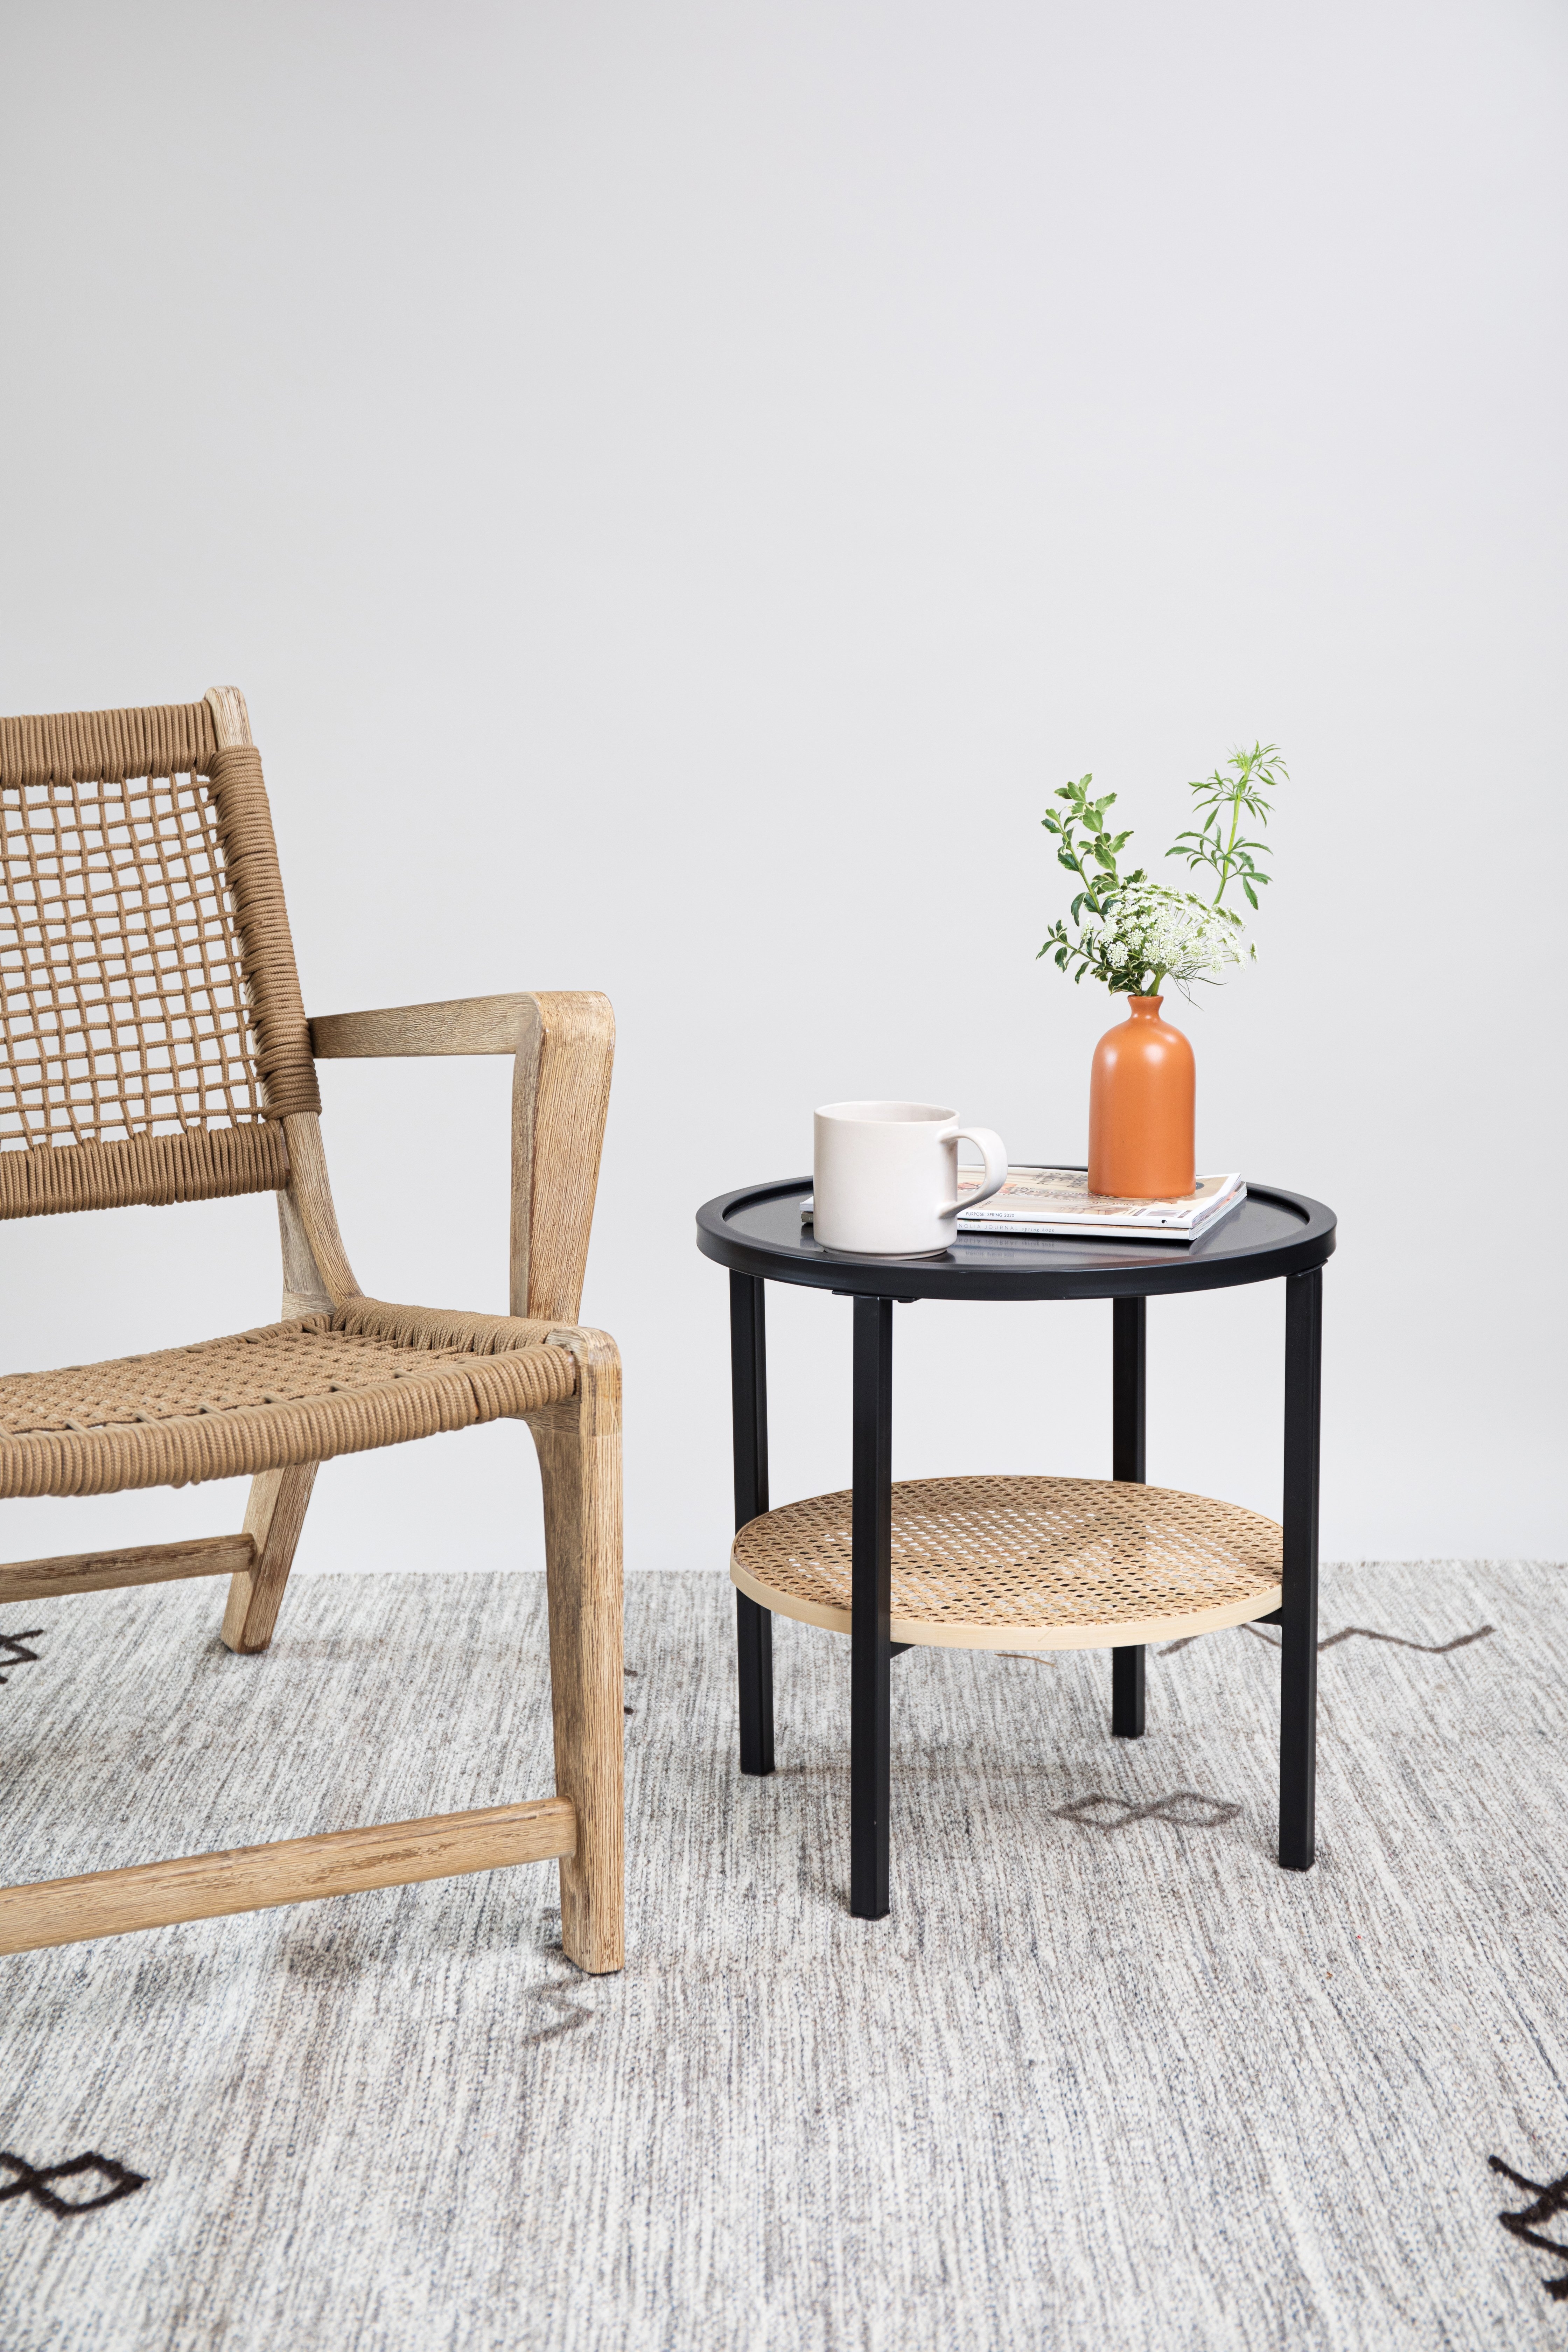 17.75" Round Metal Accent Table with Tray-Style Top & Handwoven Bamboo Shelf - Image 1